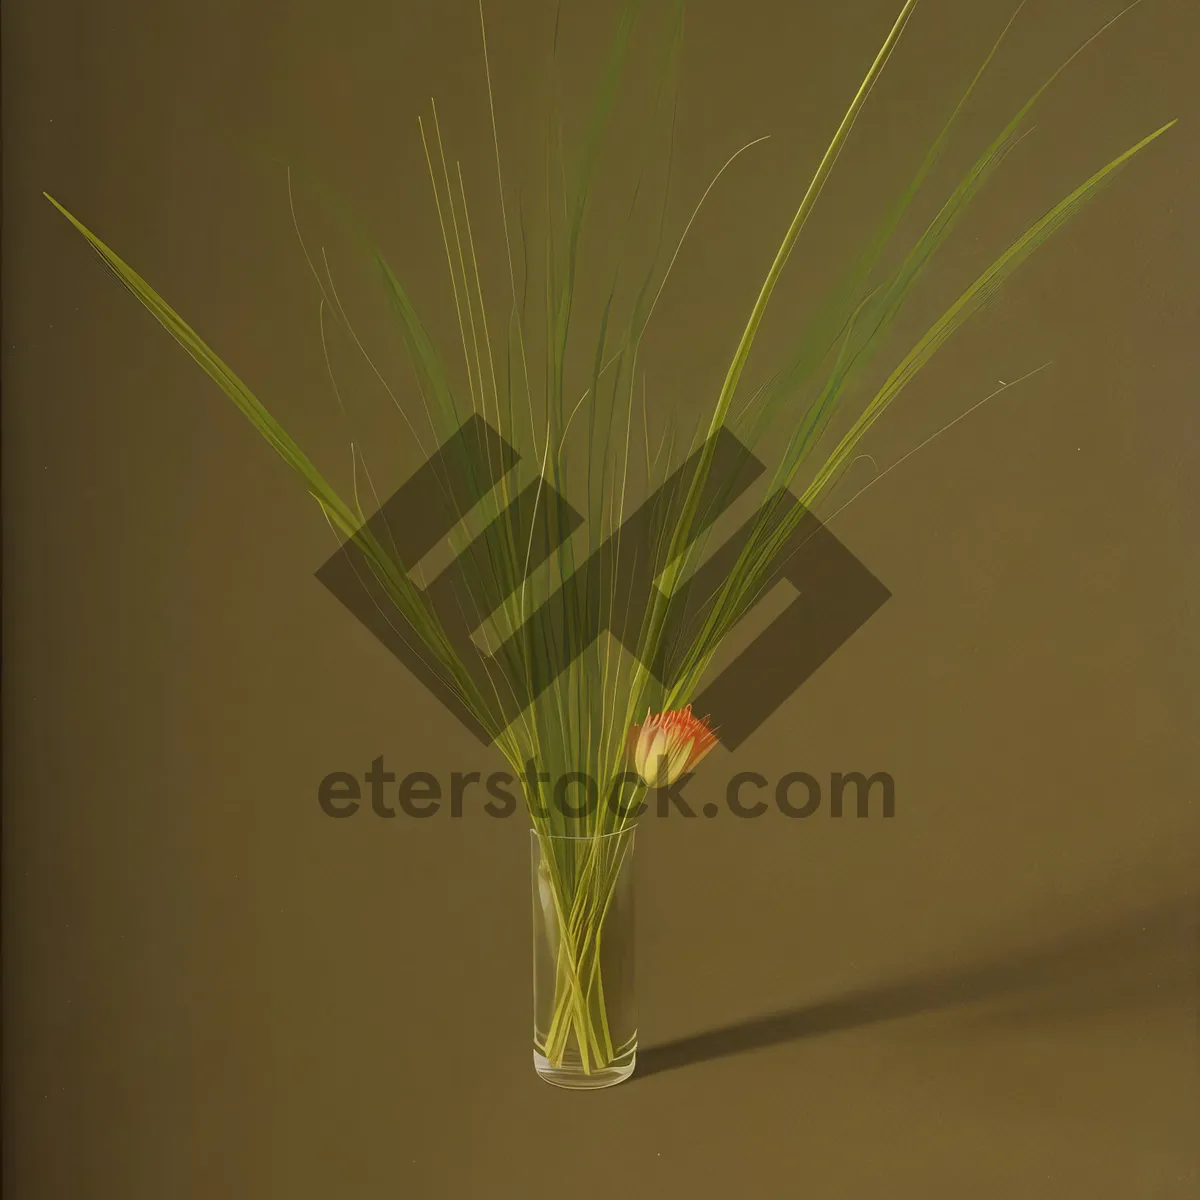 Picture of Wheat Walking Stick in Summer Field